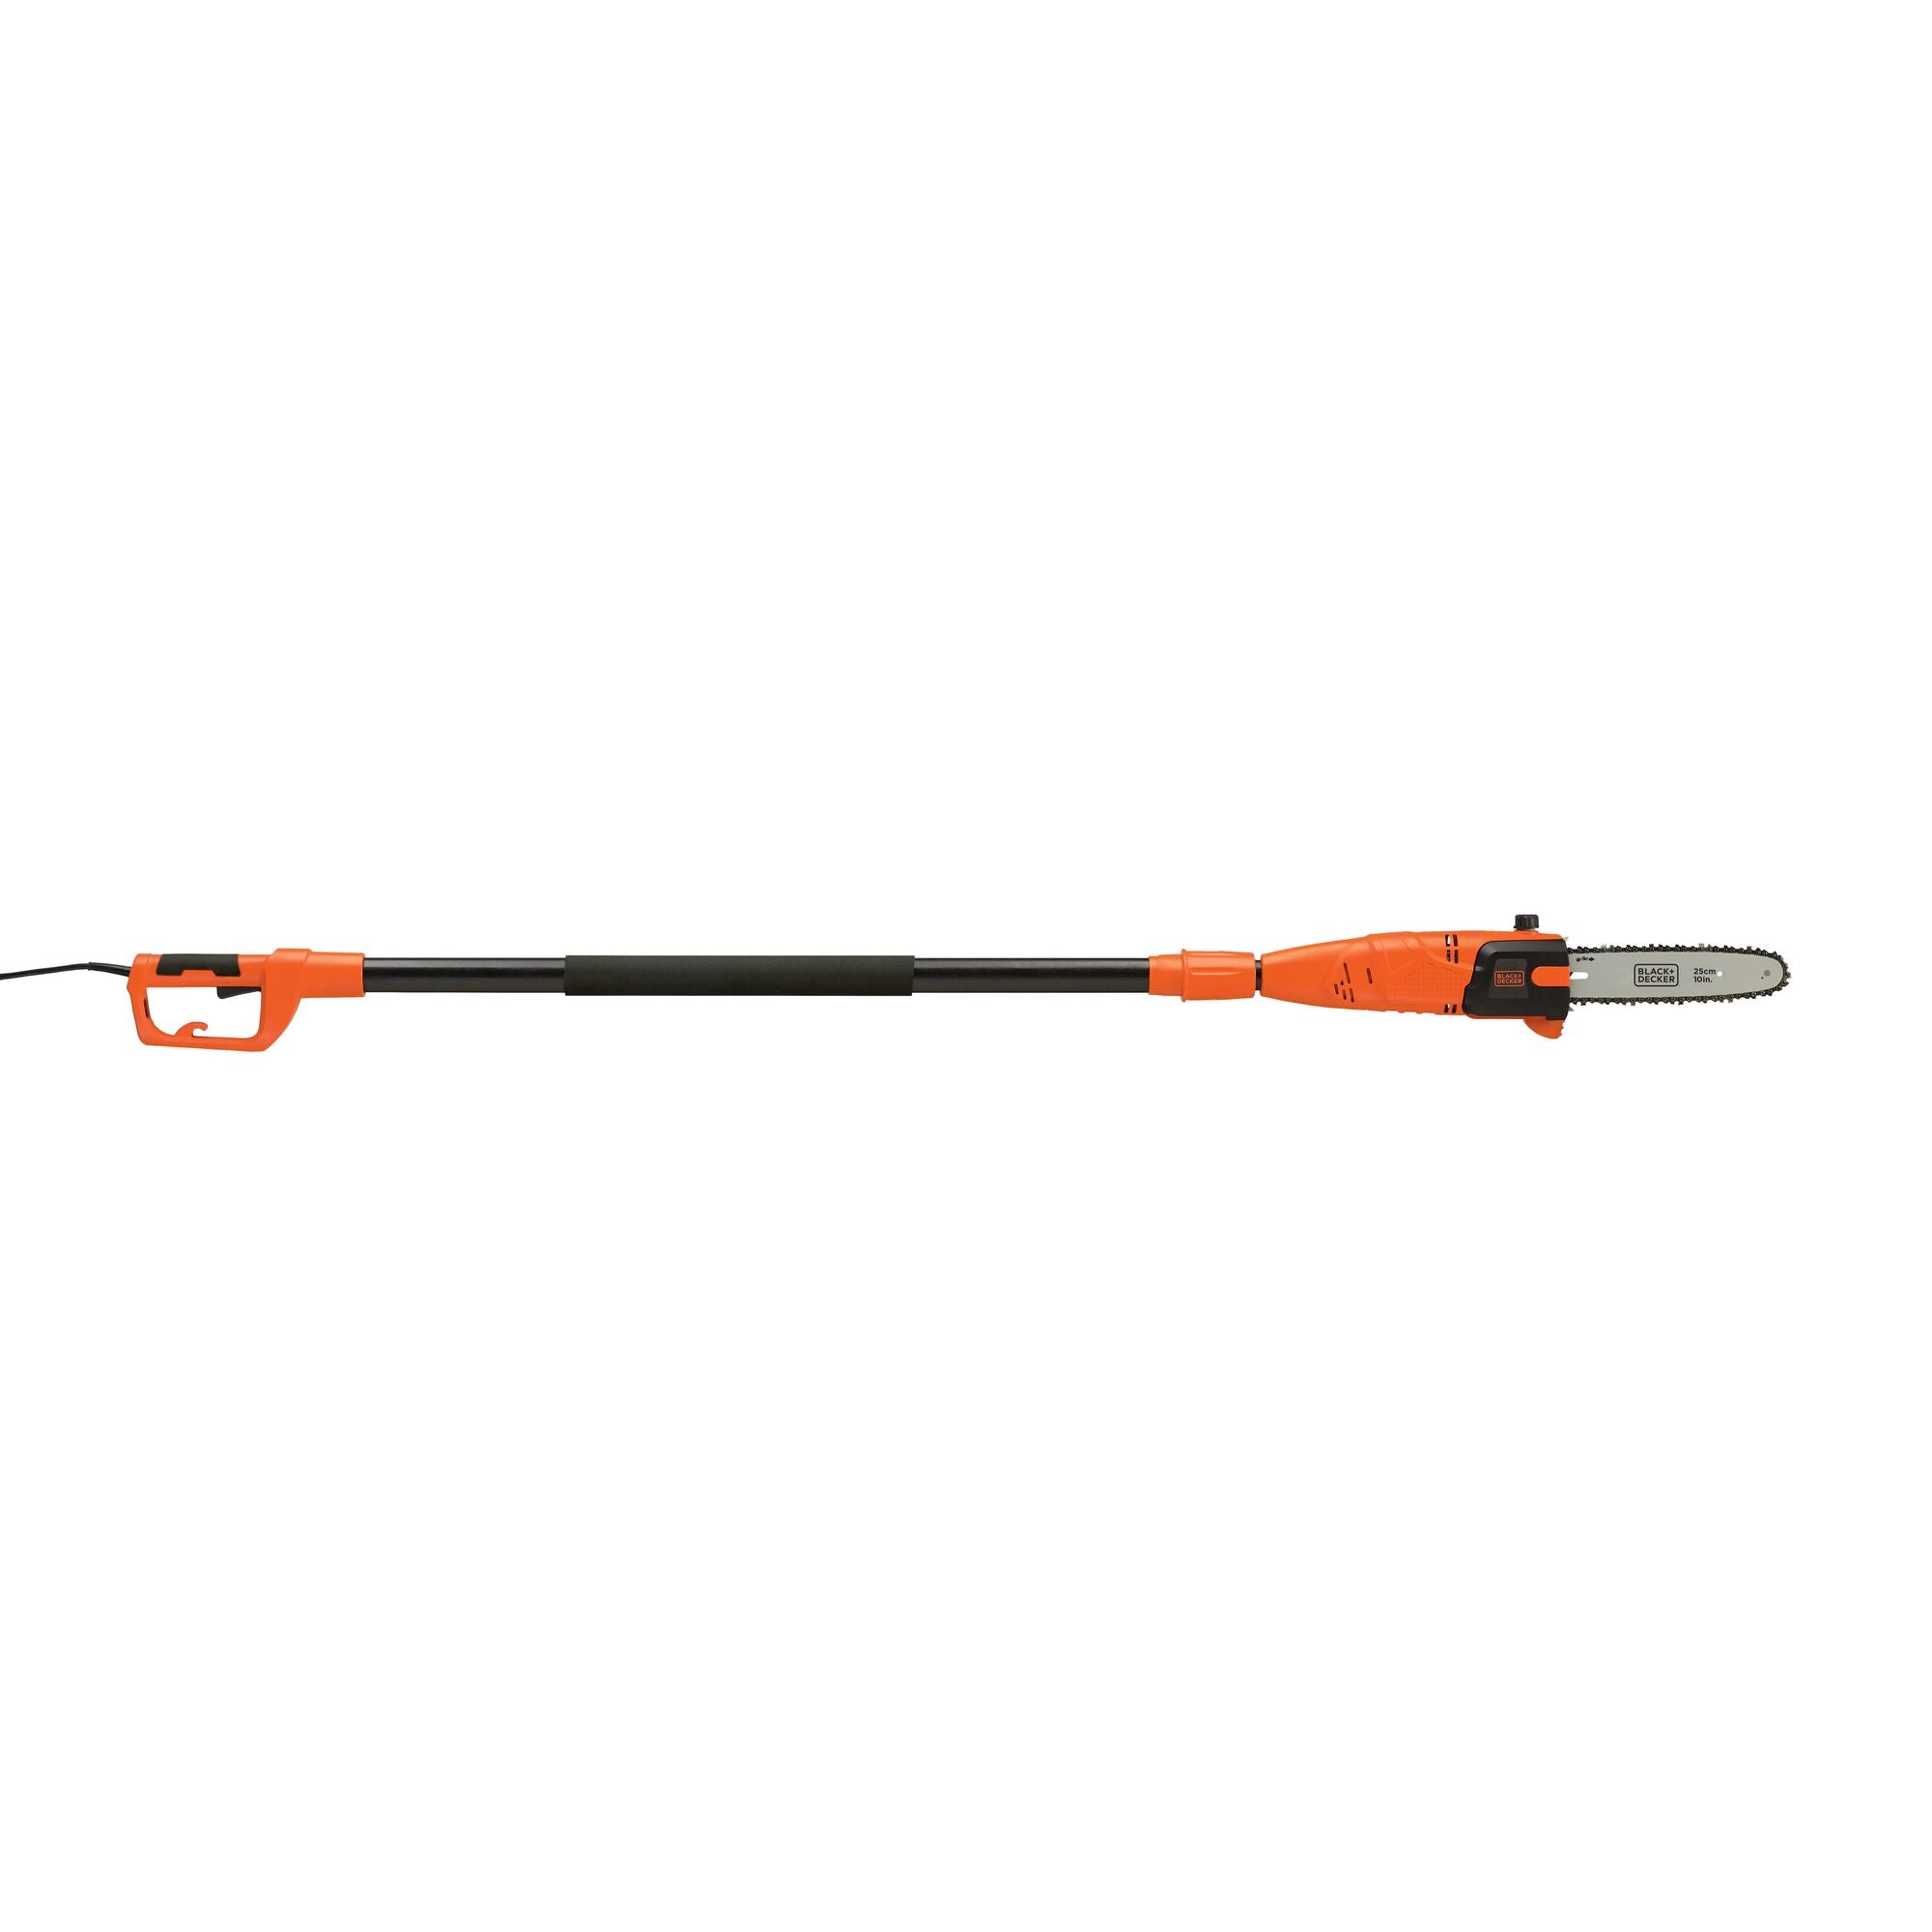 BLACK+DECKER 6.5 Amp 10 in. Electric Pole Saw (PP610)